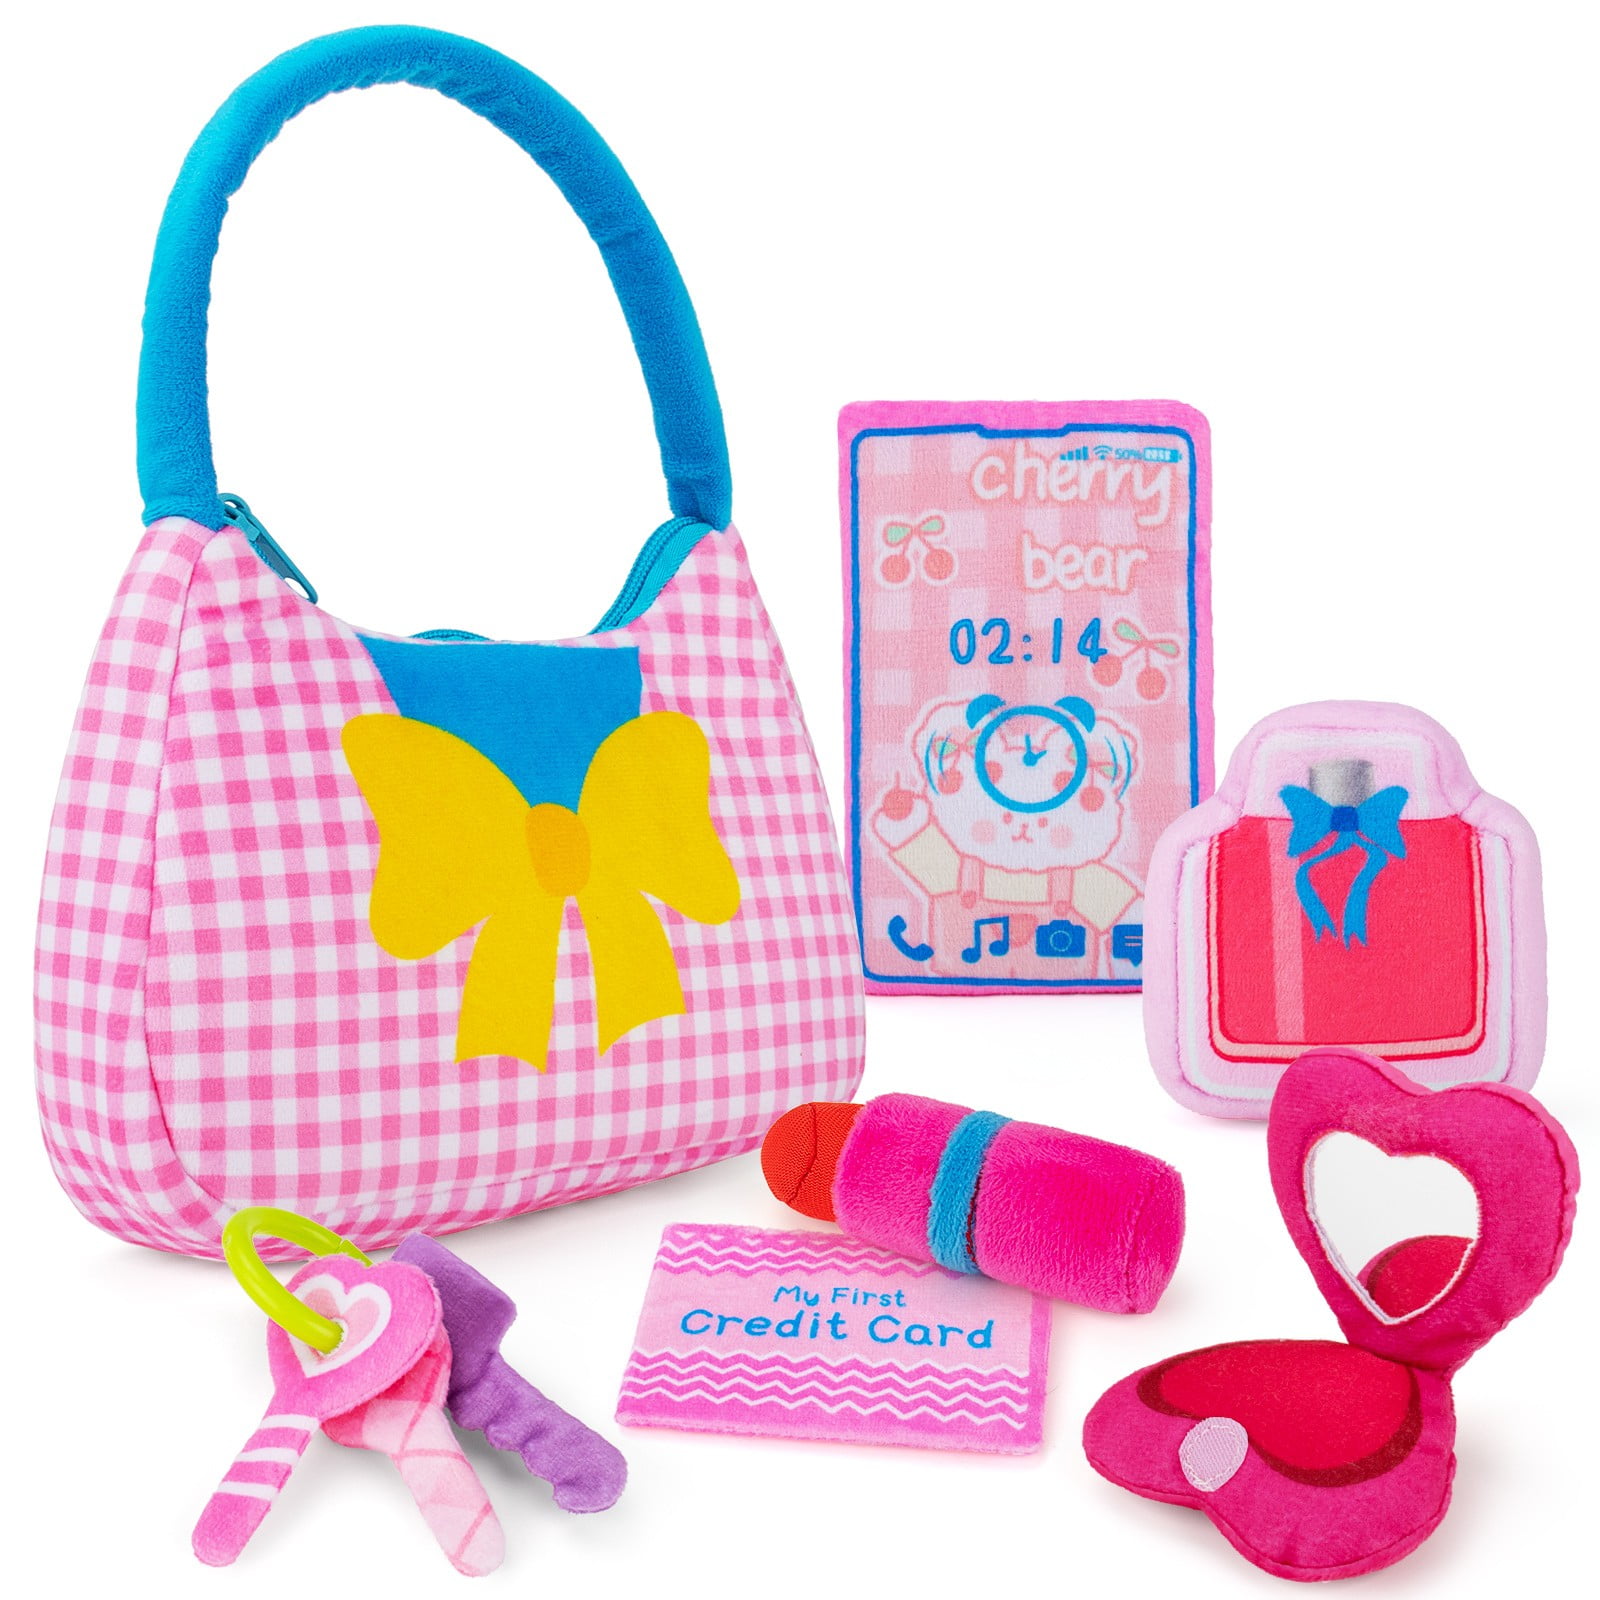 Toddler Purse Baby Girl Toys Prentend Play Little Girls Princess1 2 3 4 Years Old My First Toys Set 5 Accessories Perfect Gifts Birthday Valentine s 47a4ea36 c1ab 432d 89db 463d55f11a31.c2eeaf55ba401f1f8f0f224f27e283d4